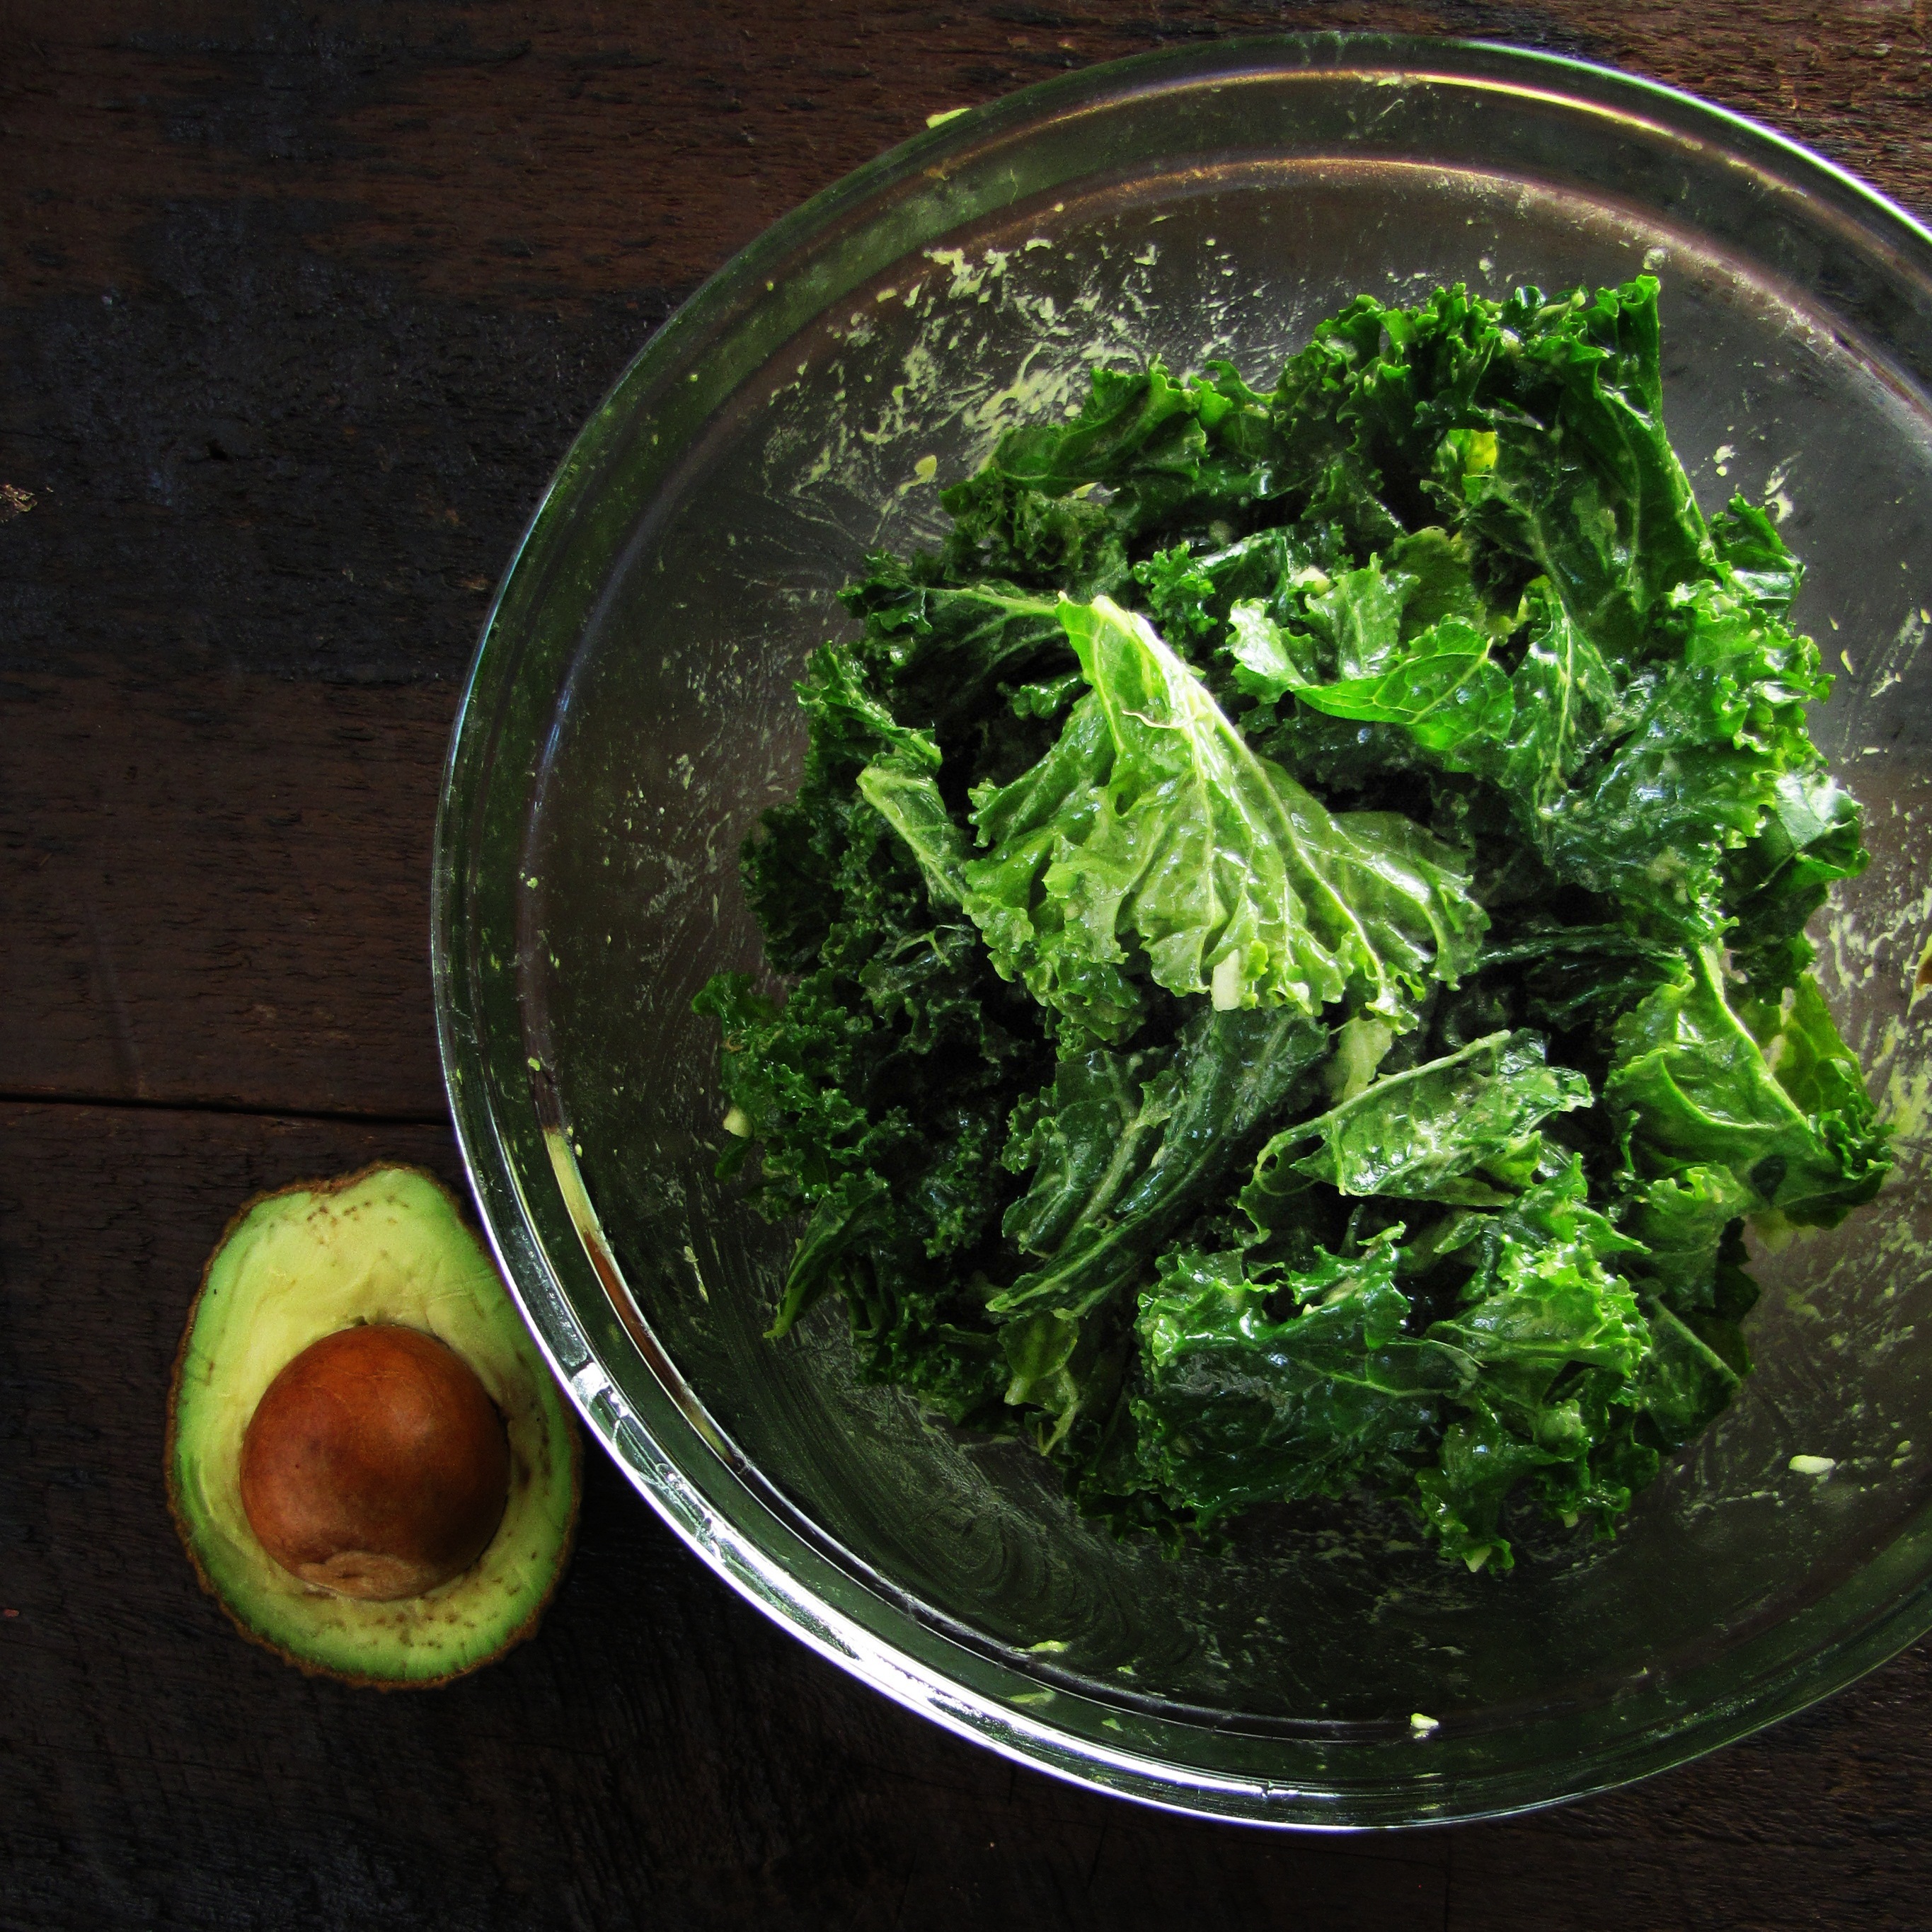 Cleanse Preview: Kale Lovin’